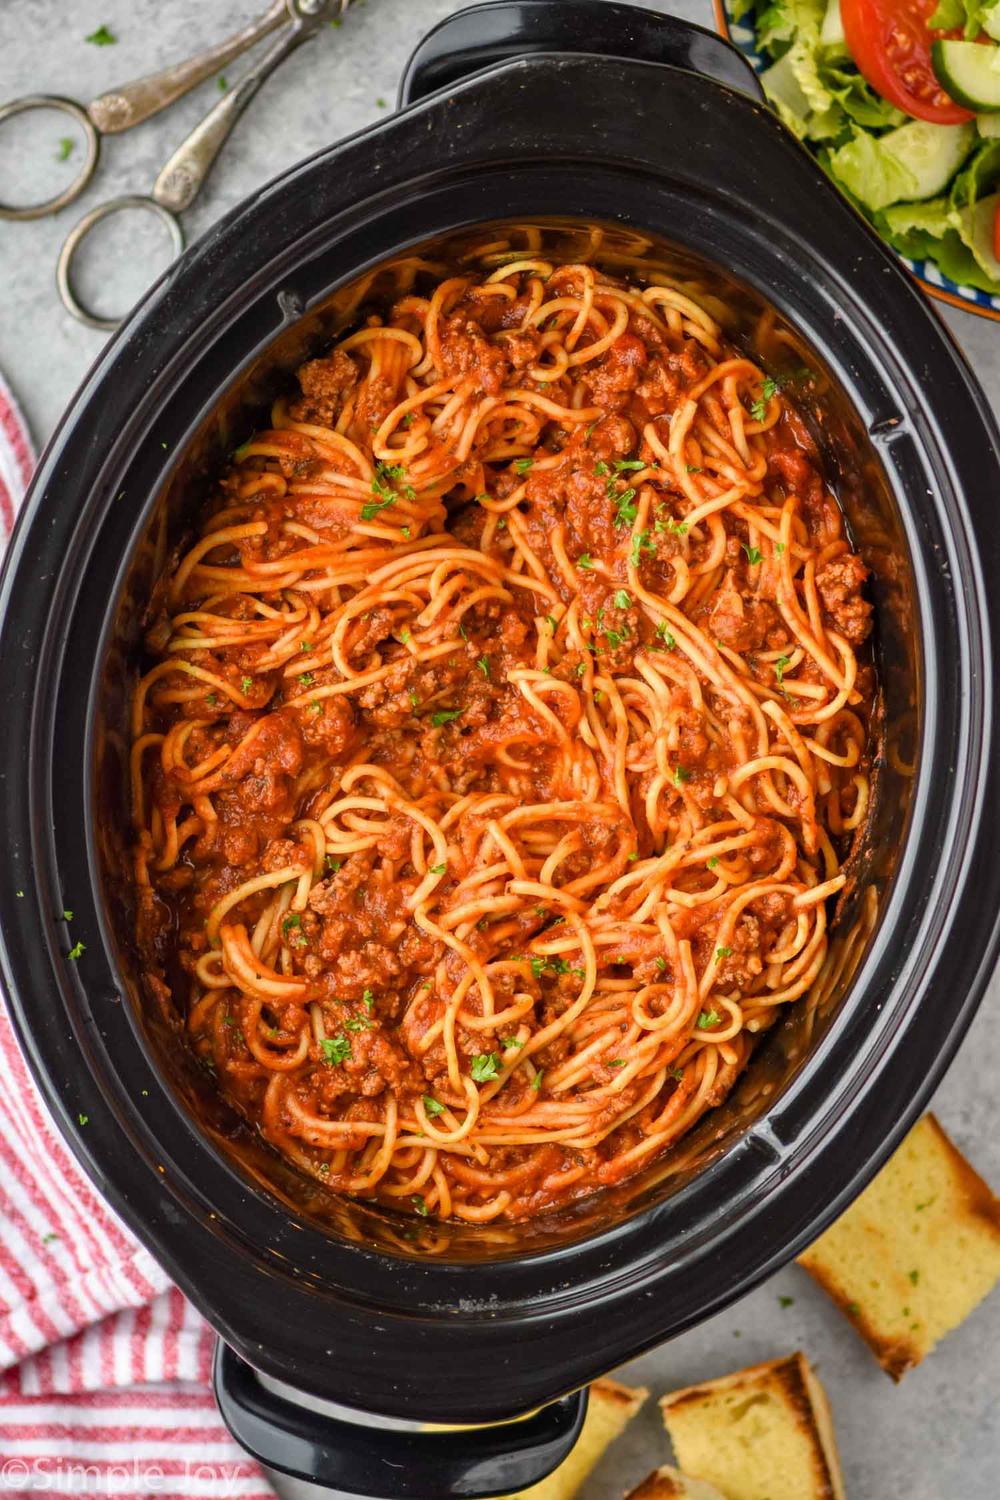 Spaghetti and ground beef in a slow cooker with a side salad and garlic bread.